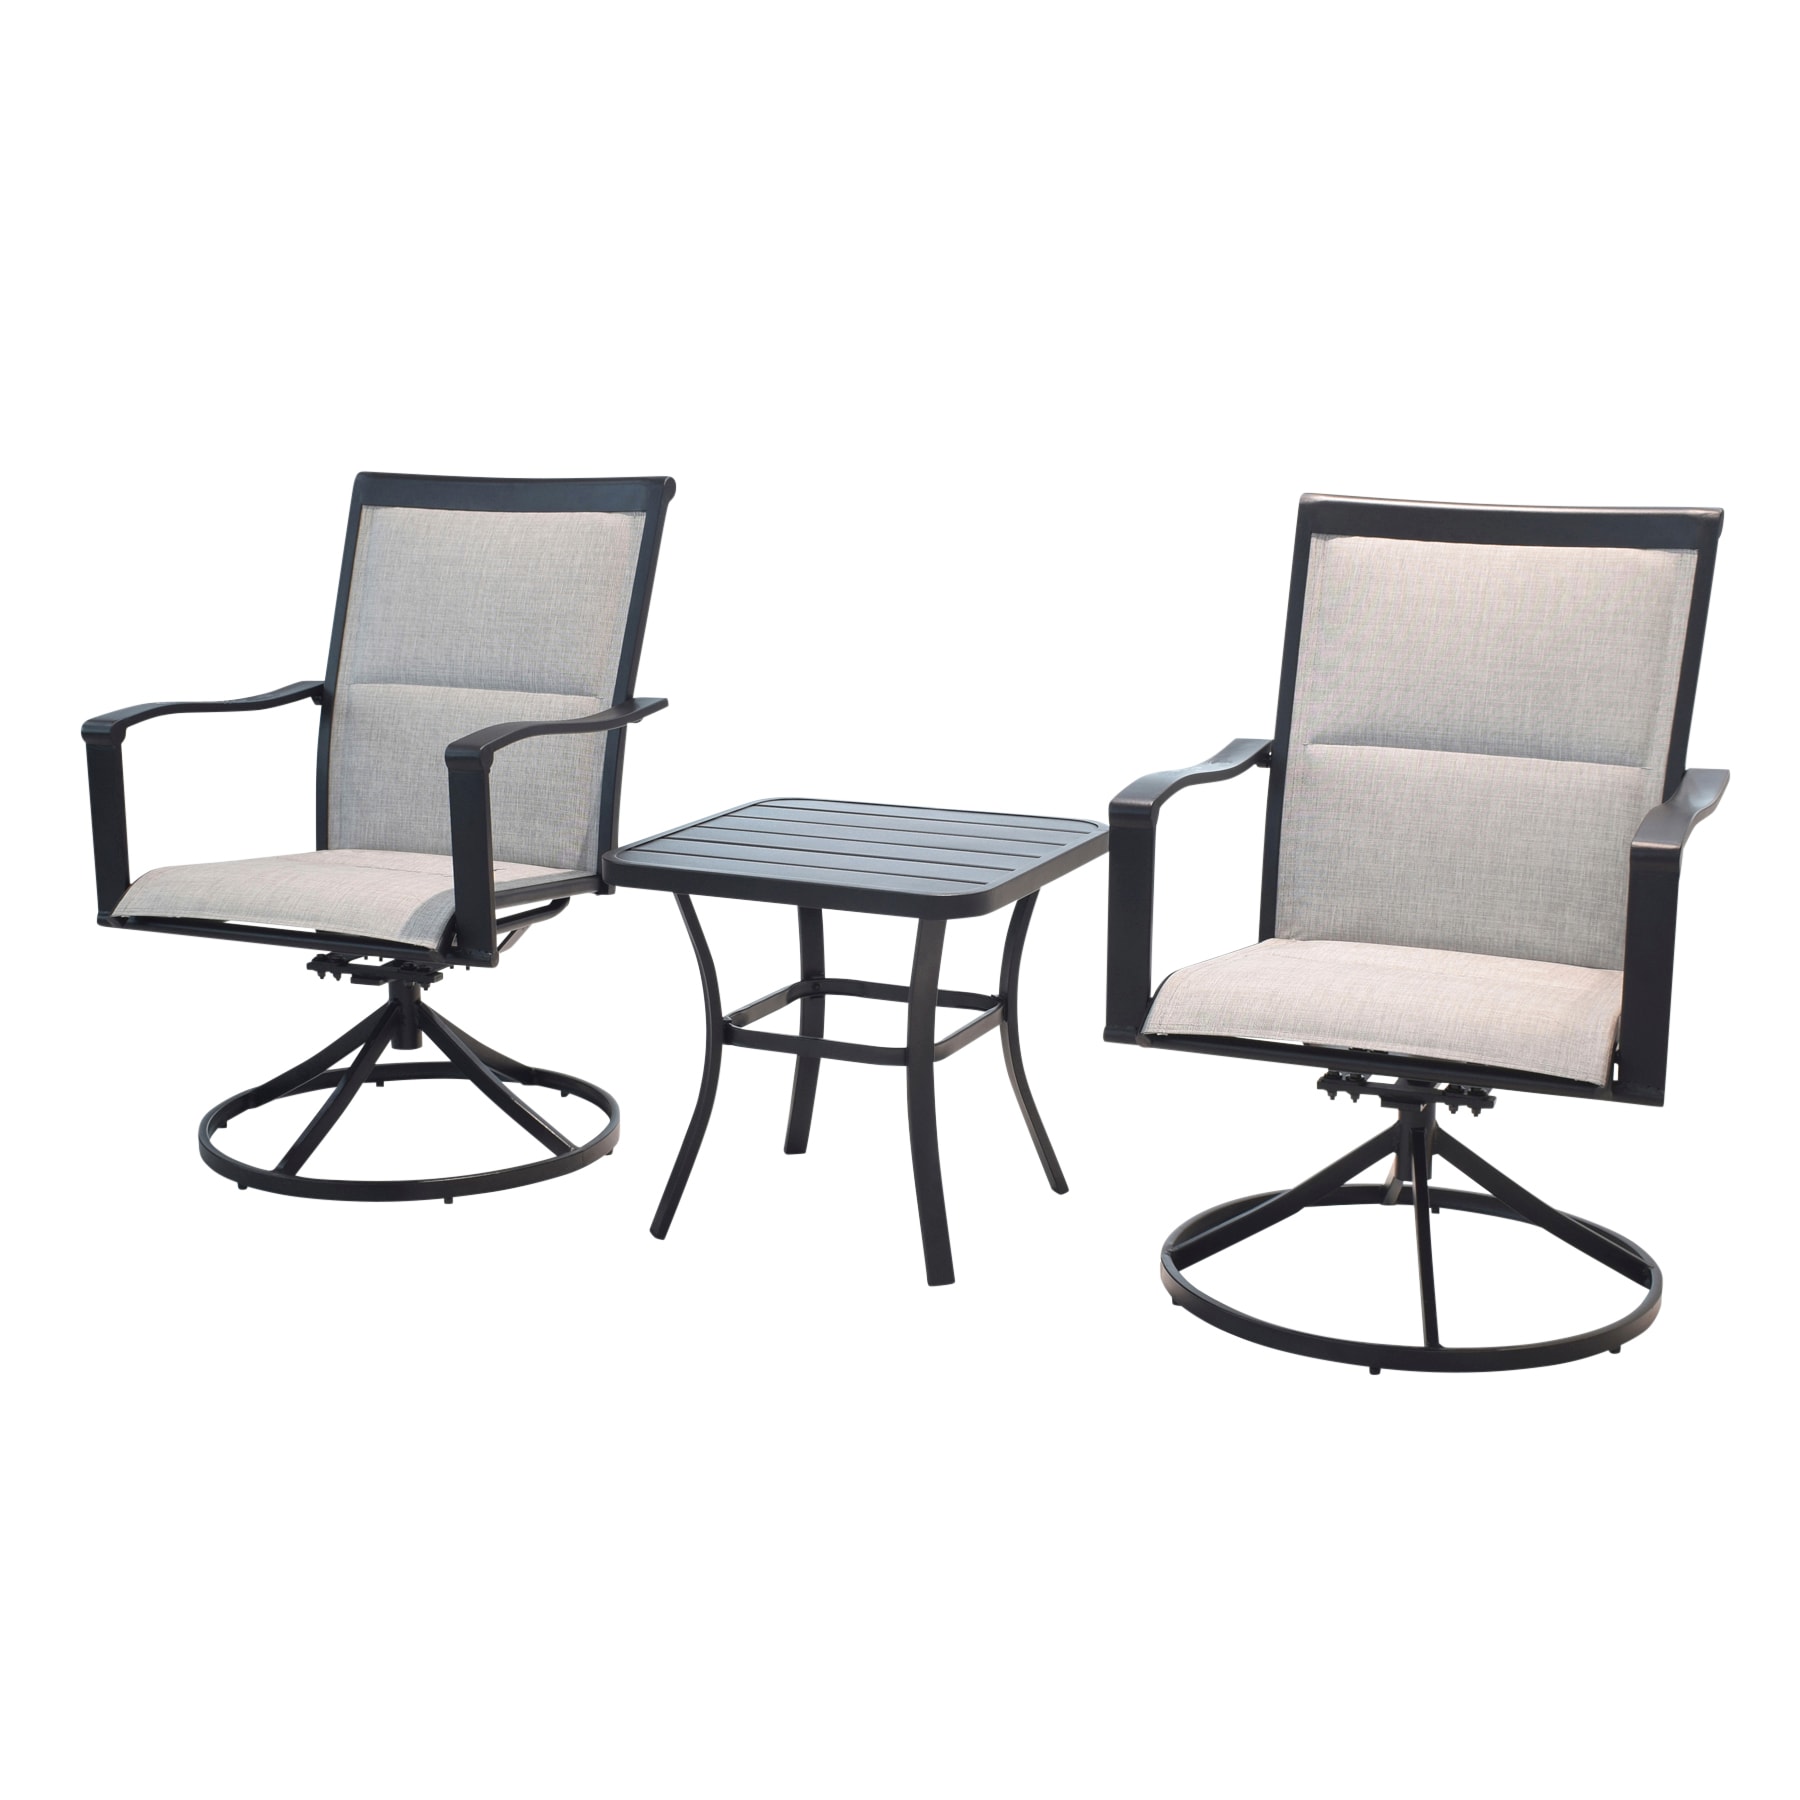 Mainstays Wesley Creek 3-Piece Bistro Set with Swivel Chairs Tan 